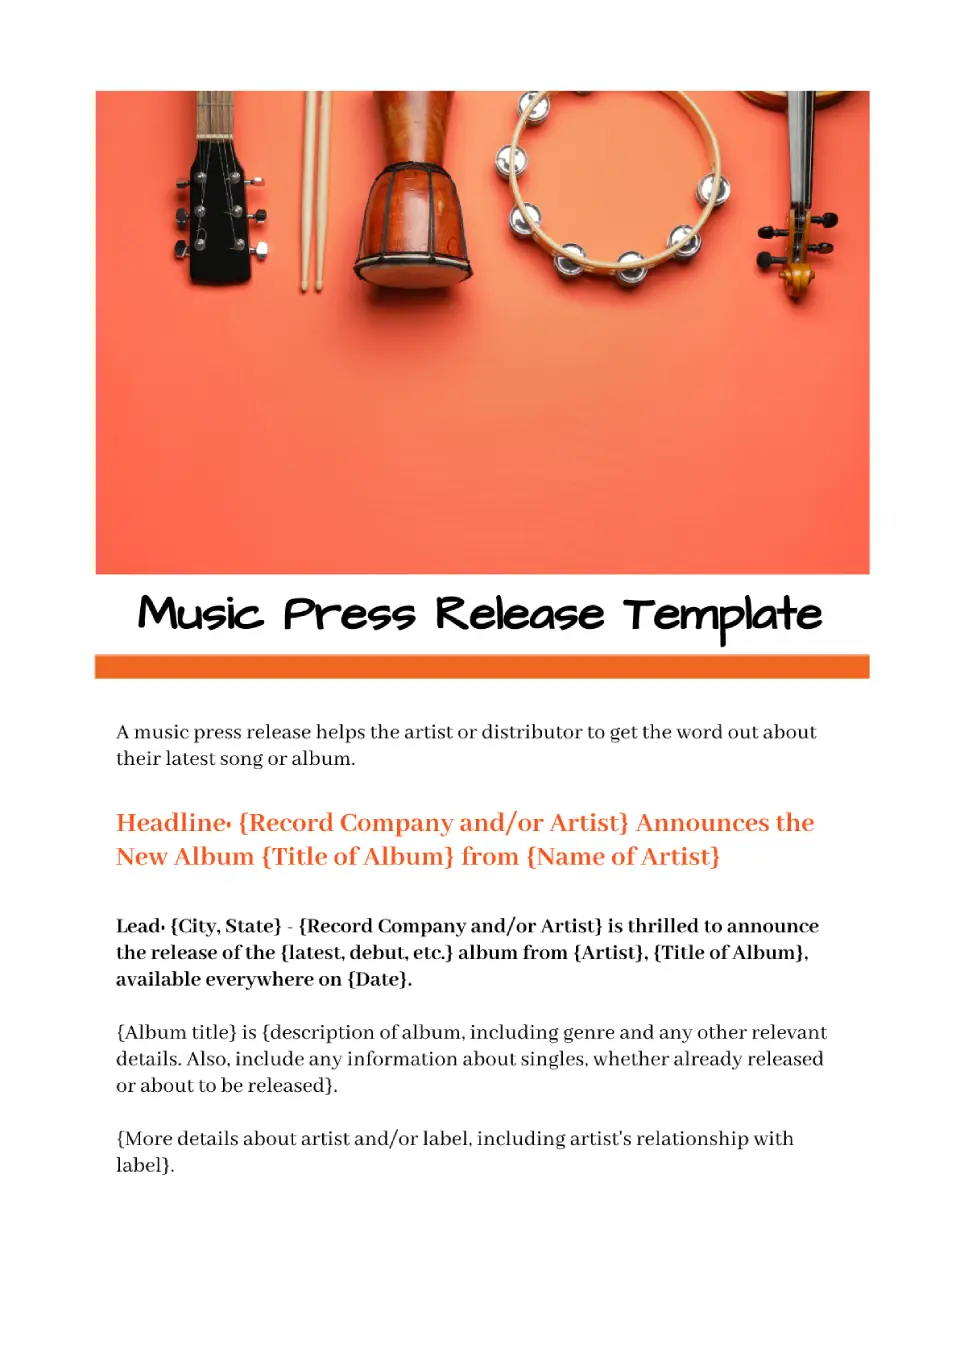 Music Press Release for Google Docs